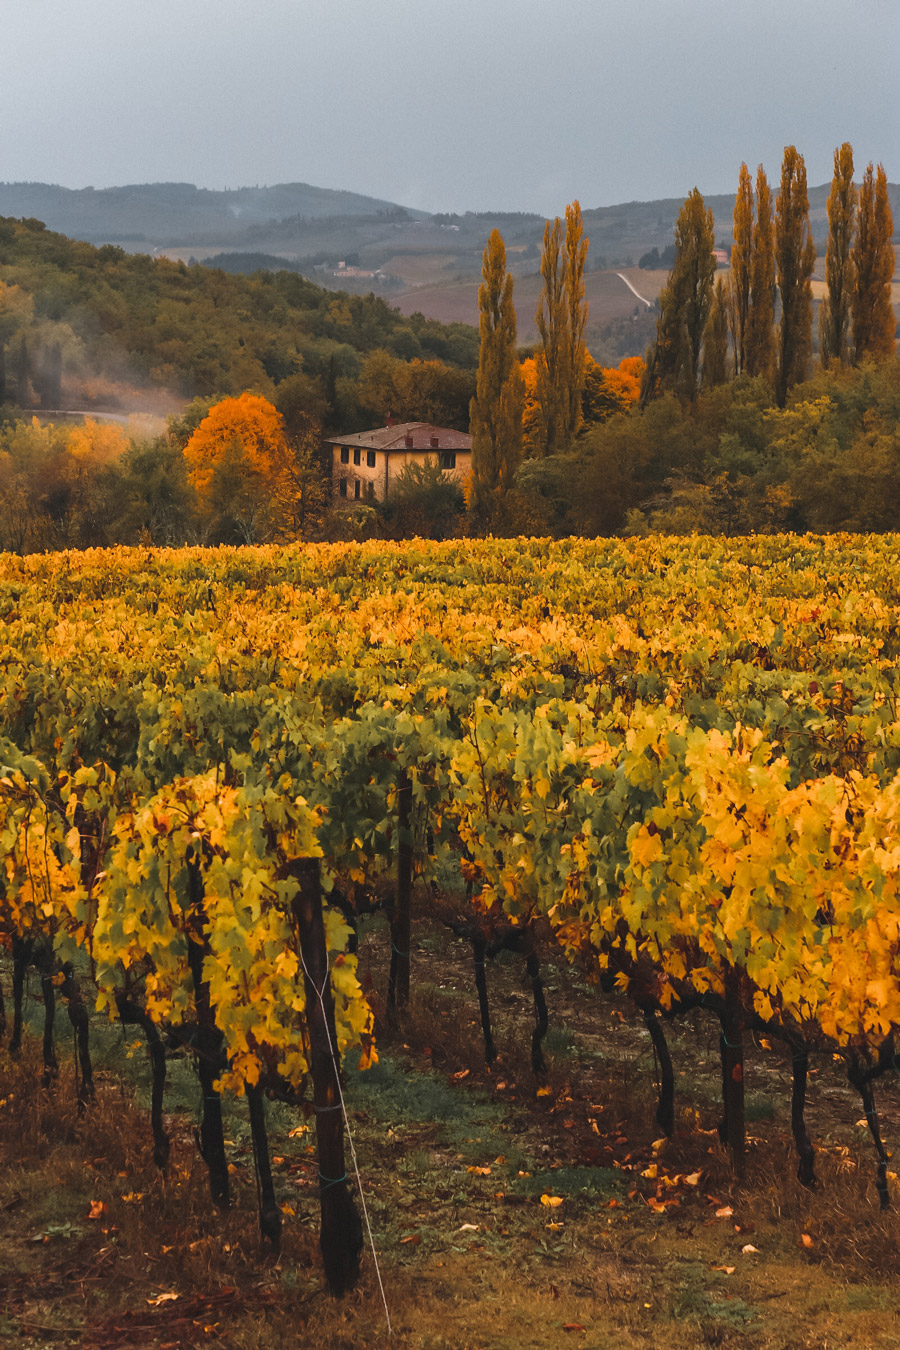 WHERE TO SEE FOLIAGE IN TUSCANY